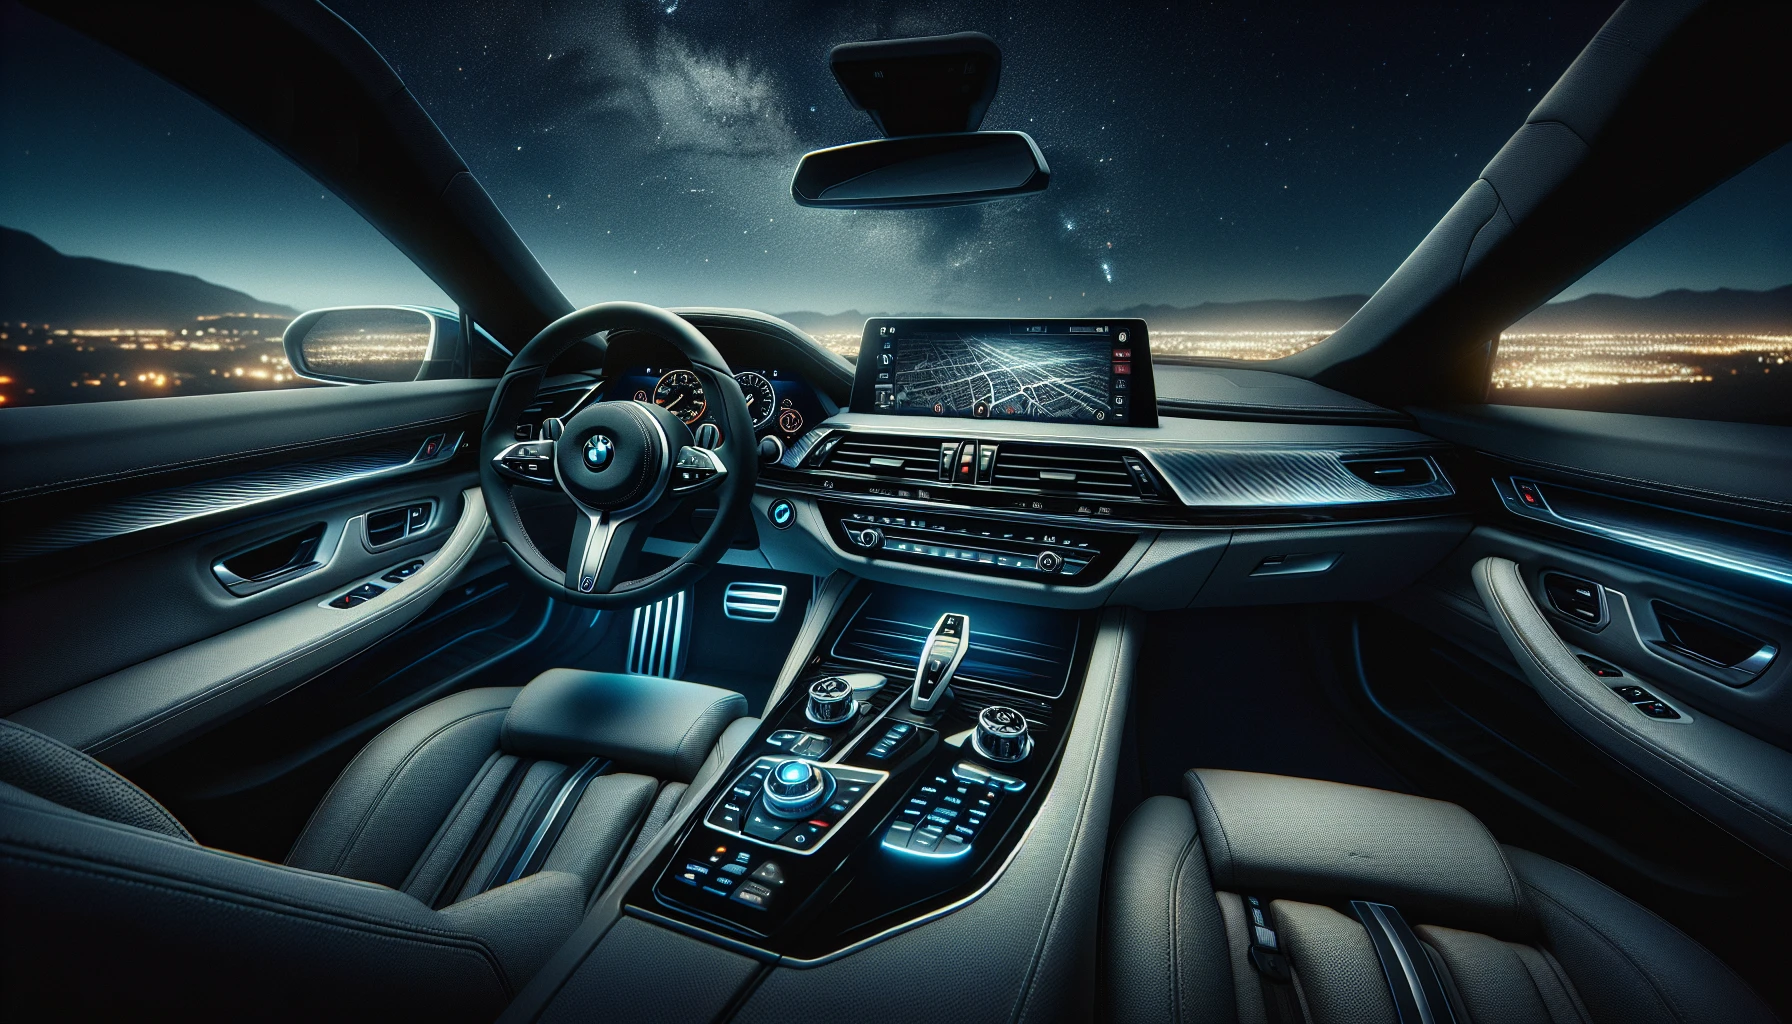 BMW convertible's advanced infotainment and connectivity features